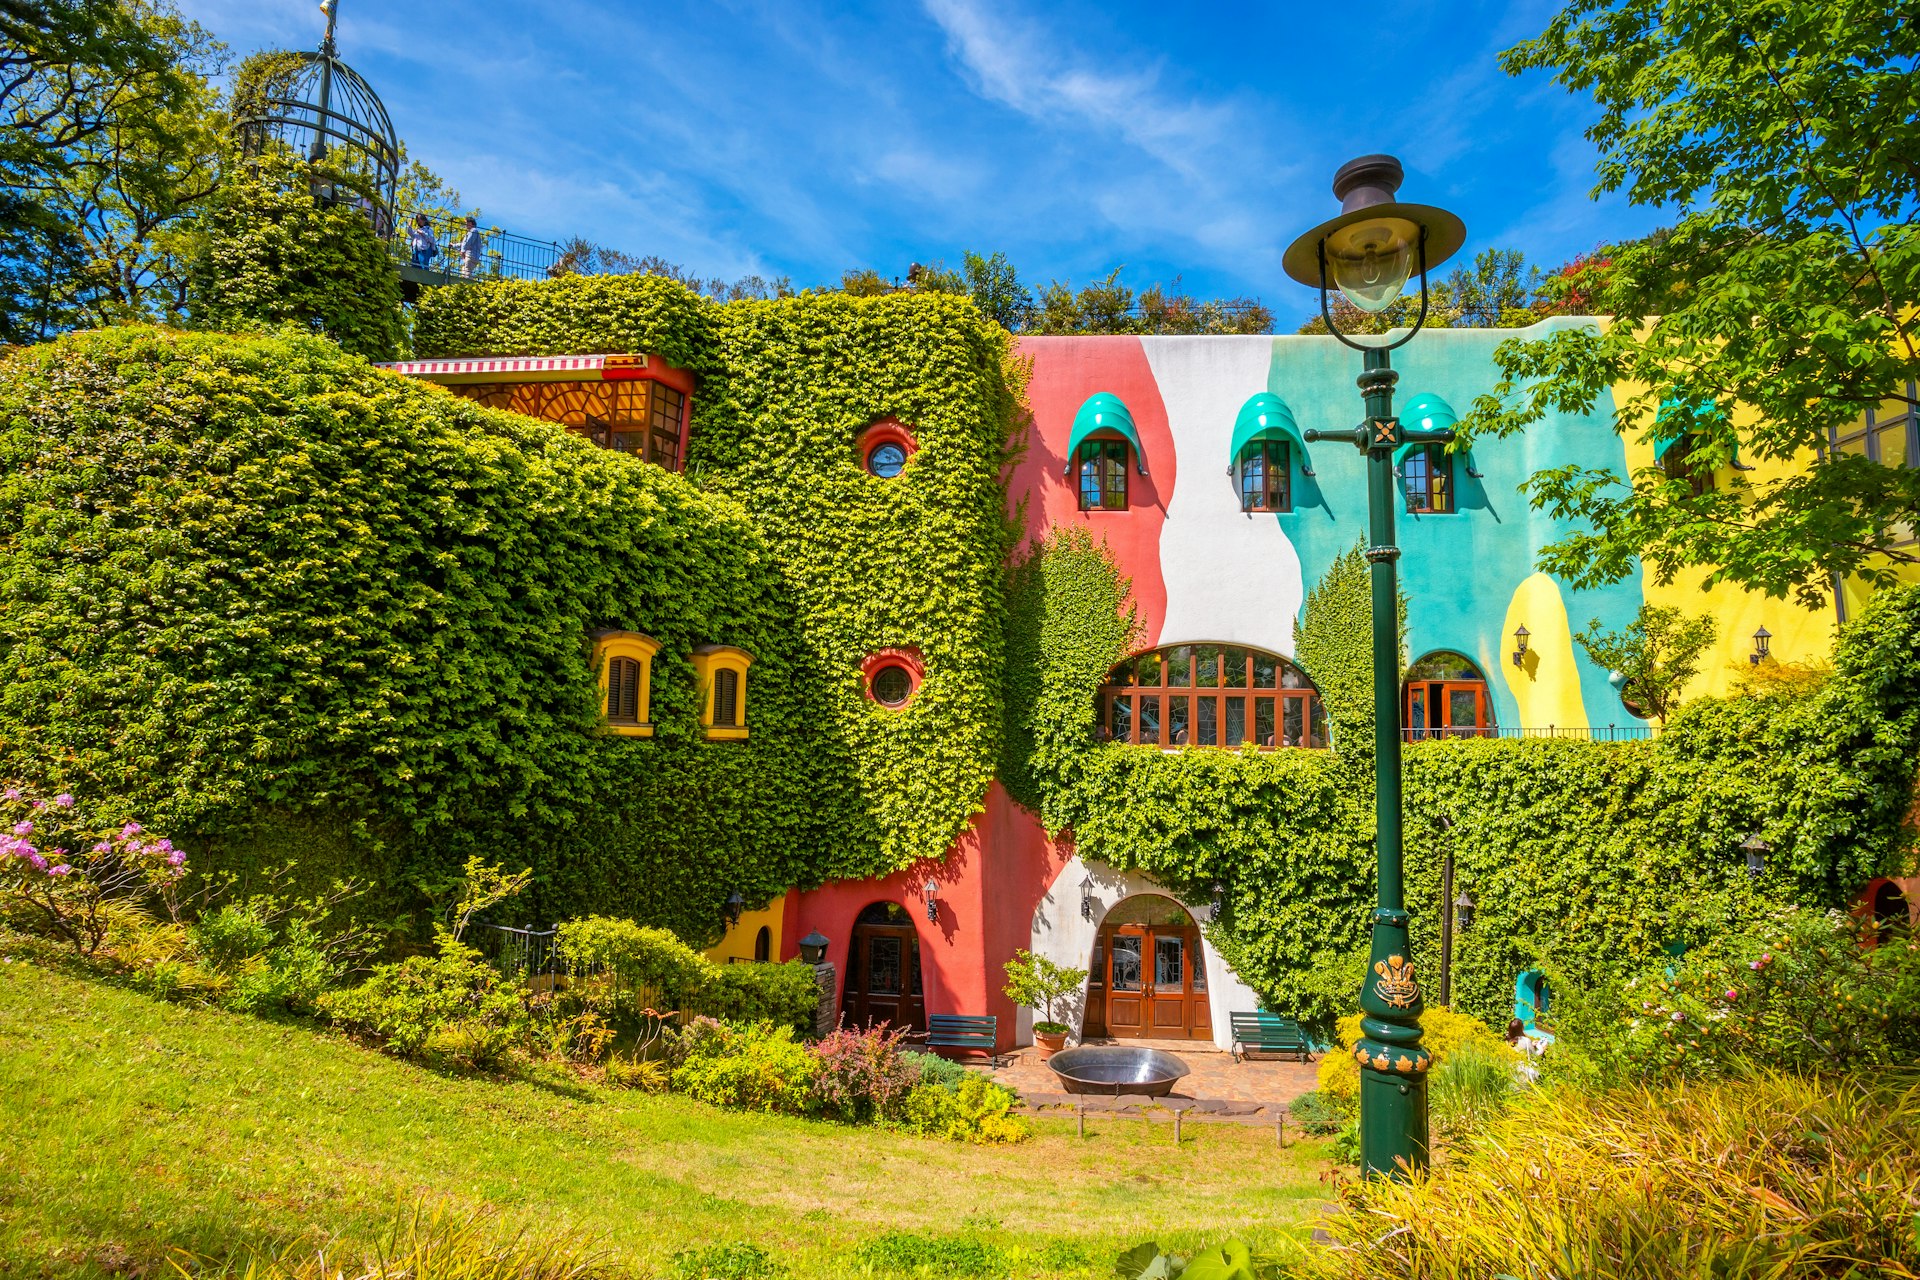 Exterior of the Ghibli museum, which holds the work of Studio Ghibli. 